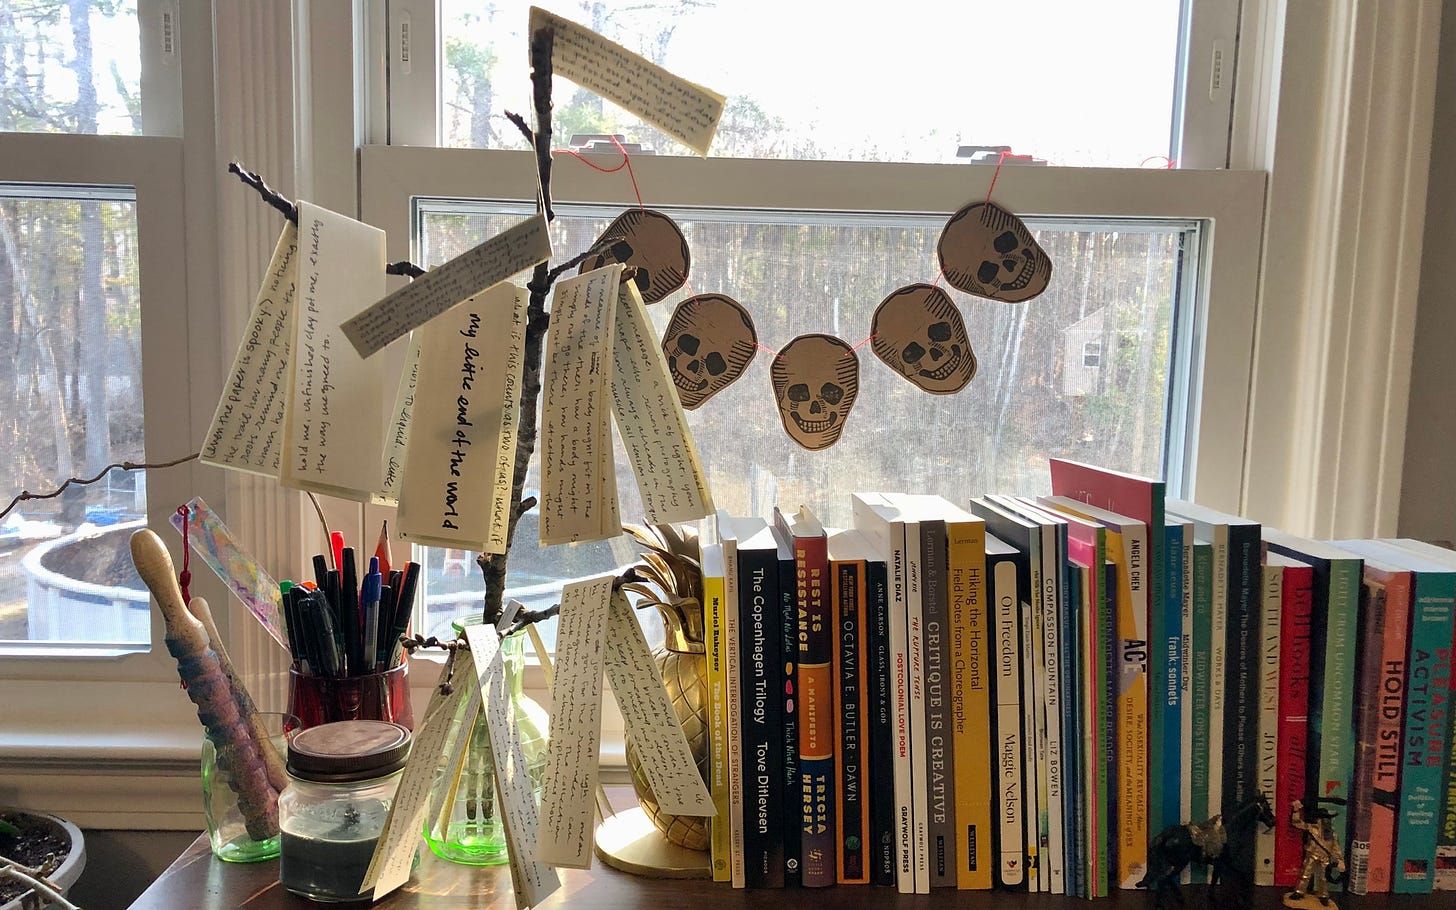 paper scraps, folded and written on in black ink, hung on a small tree branch balanced in a green glass vase. this sits beside a collection of books in front of a sunny window. a garland of skulls hangs in the window. out the windows, trees are visible. in the trees, a treehouse.